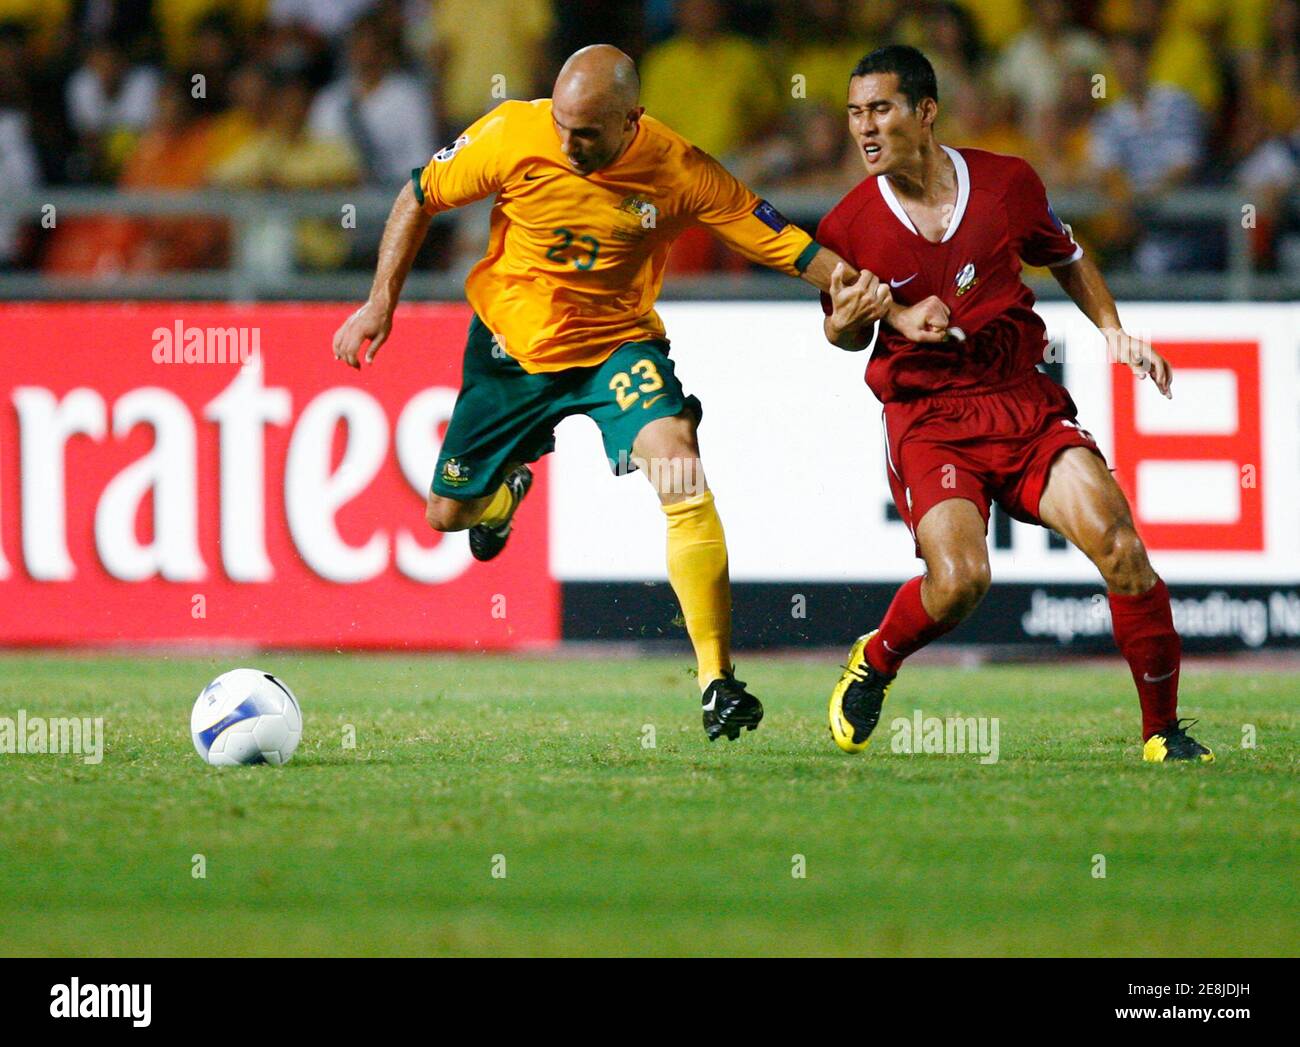 Australia's Mark Bresciano (L) is held by Thailand's Nirut Surasiang while chasing the ball during their AFC Asian Cup tournament Group A match in Bangkok July 16, 2007.     REUTERS/Jerry Lampen  (THAILAND) Stock Photo